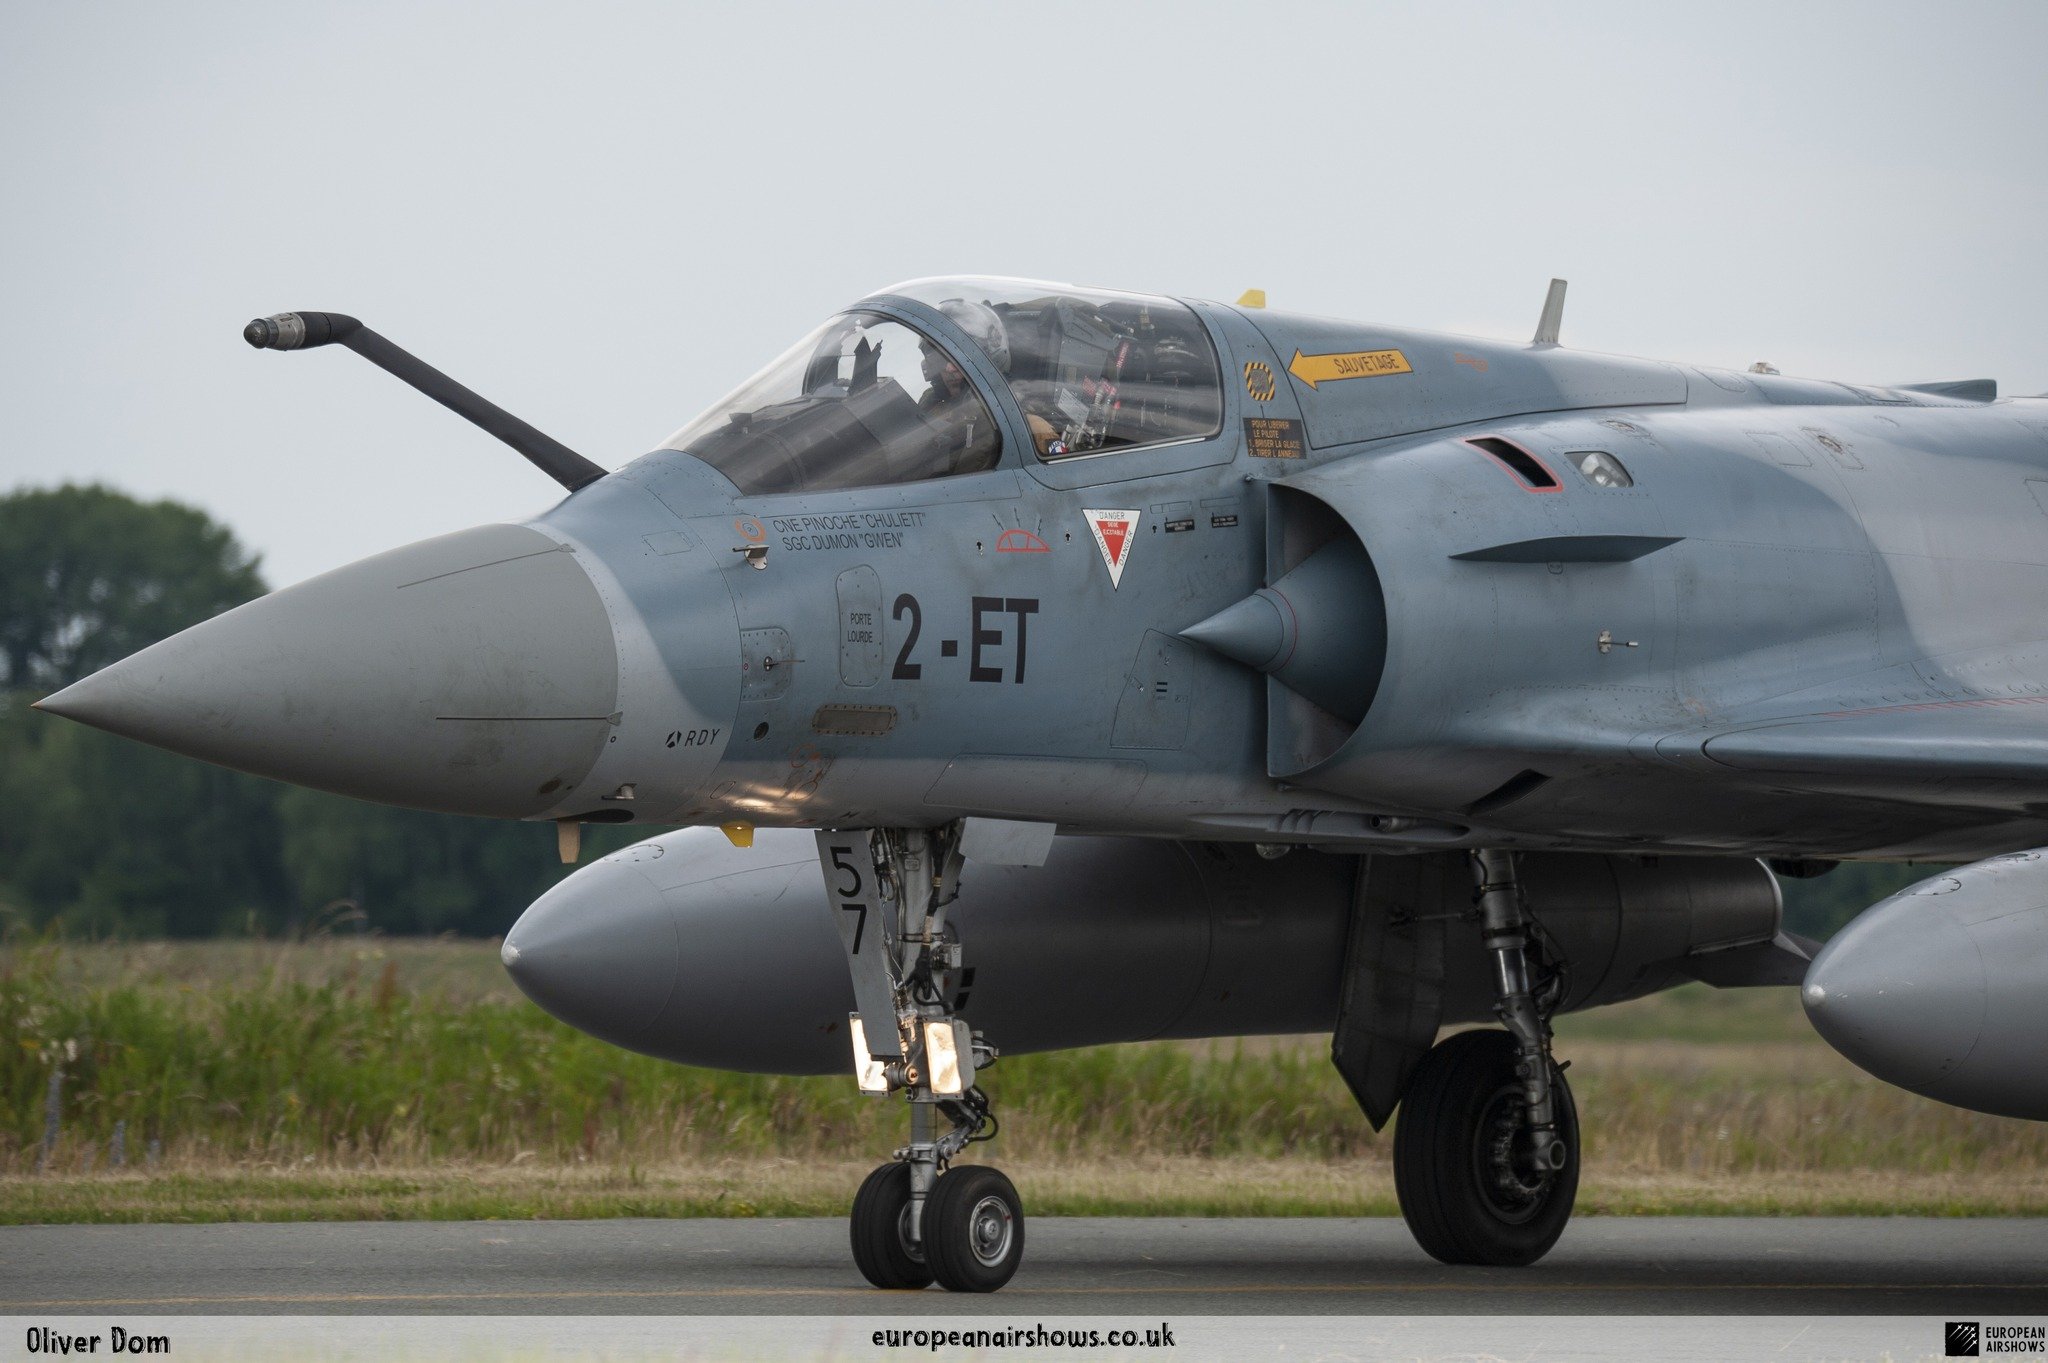 𝐀𝐈𝐑𝐒𝐇𝐎𝐖 𝐍𝐄𝐖𝐒: The @airtattoo announced further aircraft from France, Greece, and the UK that will take part in the static display this year.

This includes the French Mirage 2000-5, Hellenic F-16s from 336 Mira and the BAE 146-300 of the F